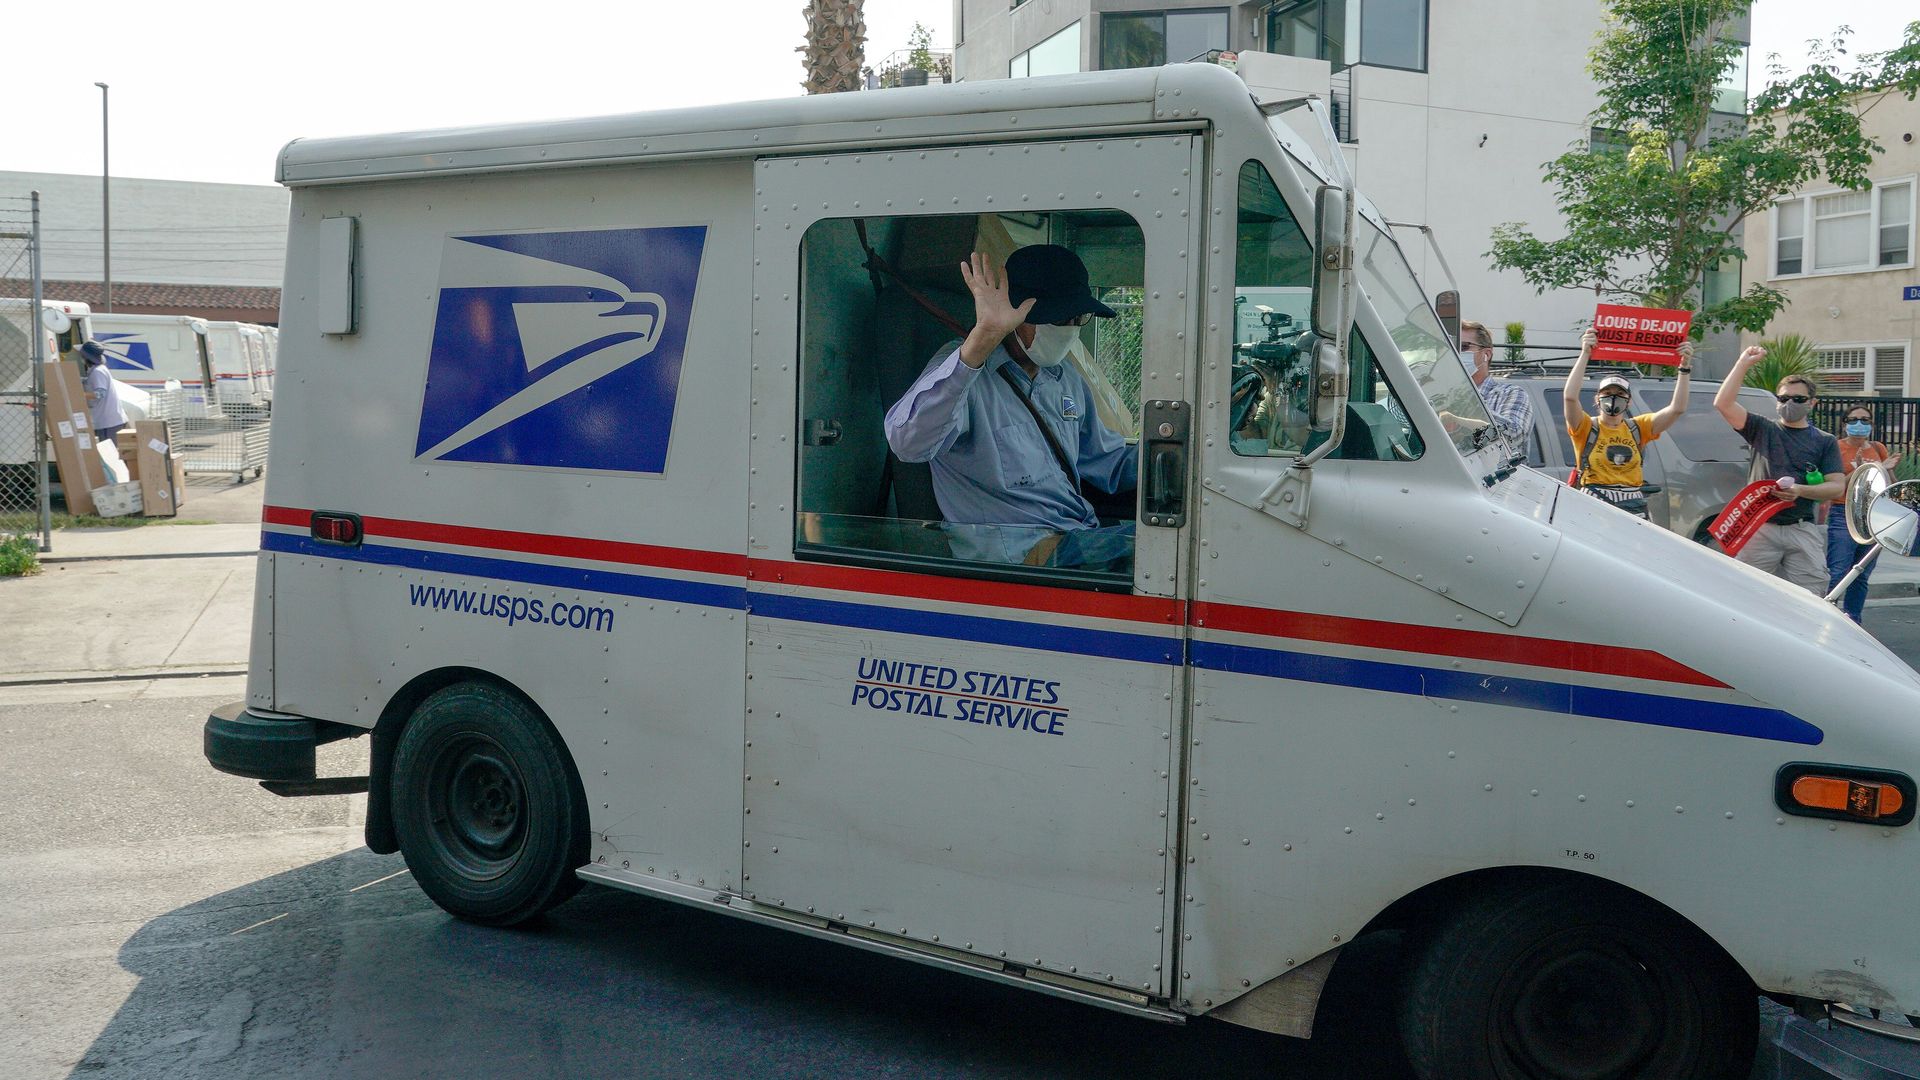 A mailperson drives a USPS truck past a crowd of people holding signs on the side of a road